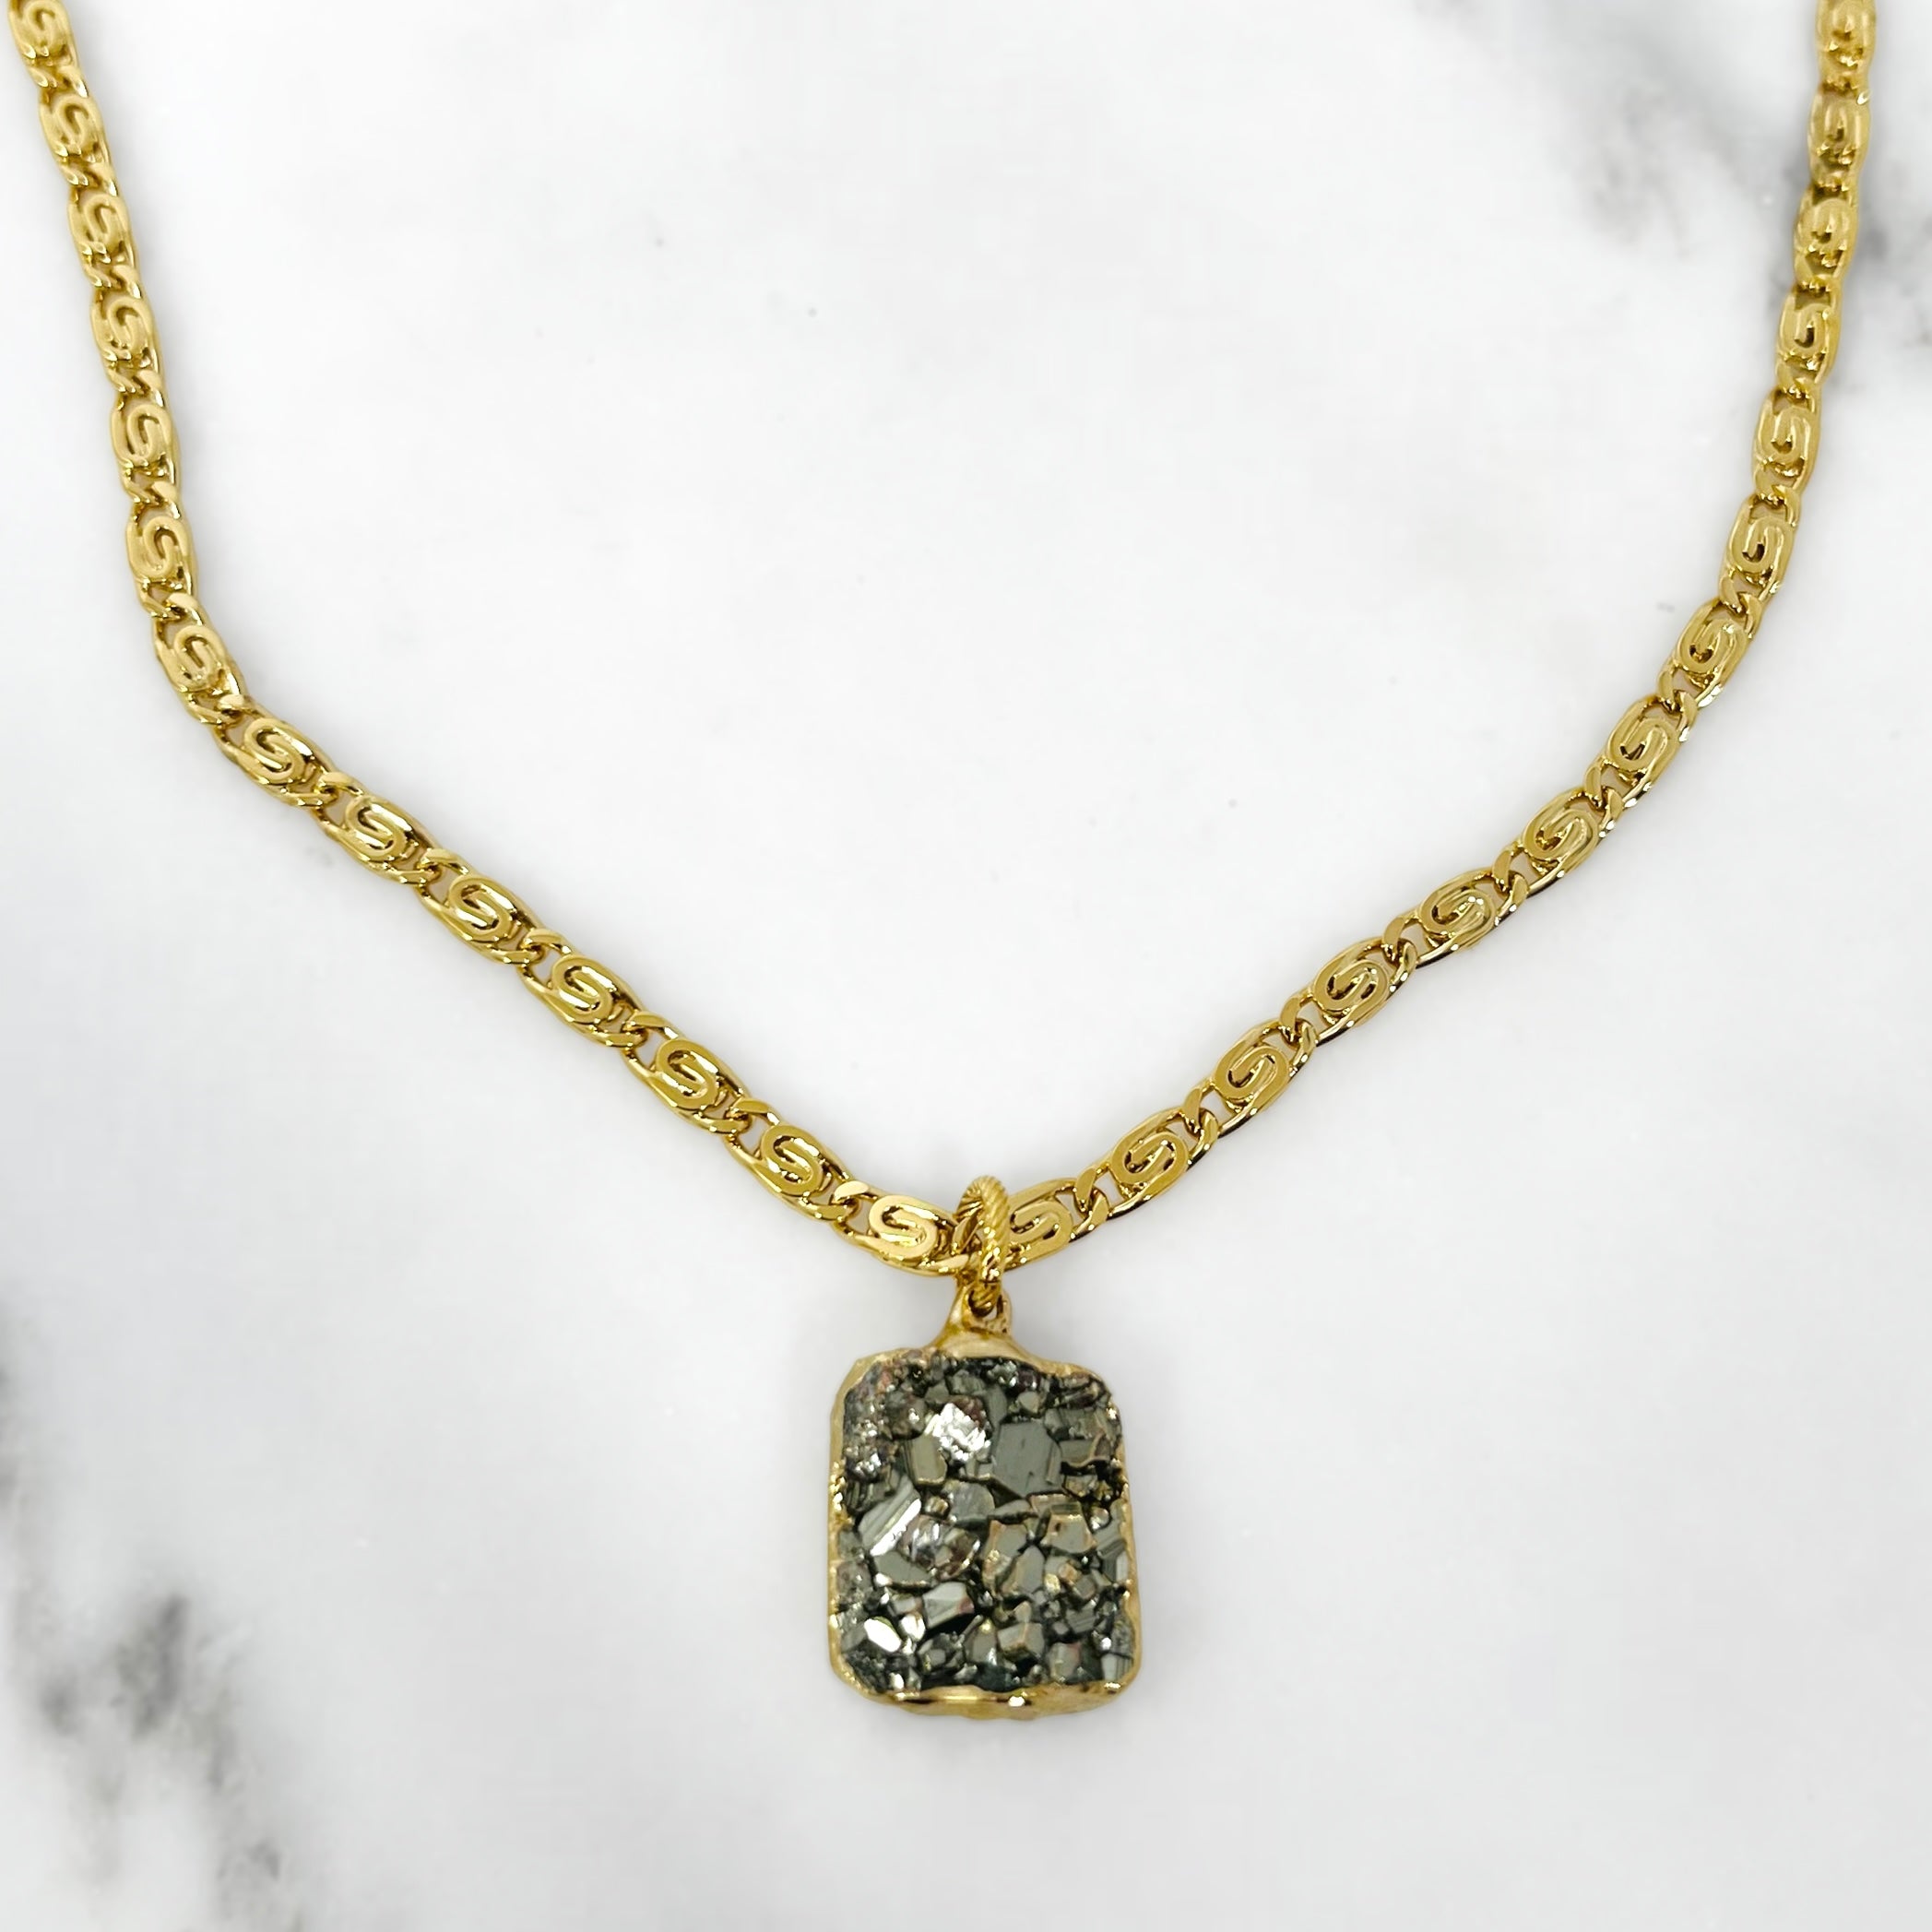 Gold-Wrapped Pyrite Necklace